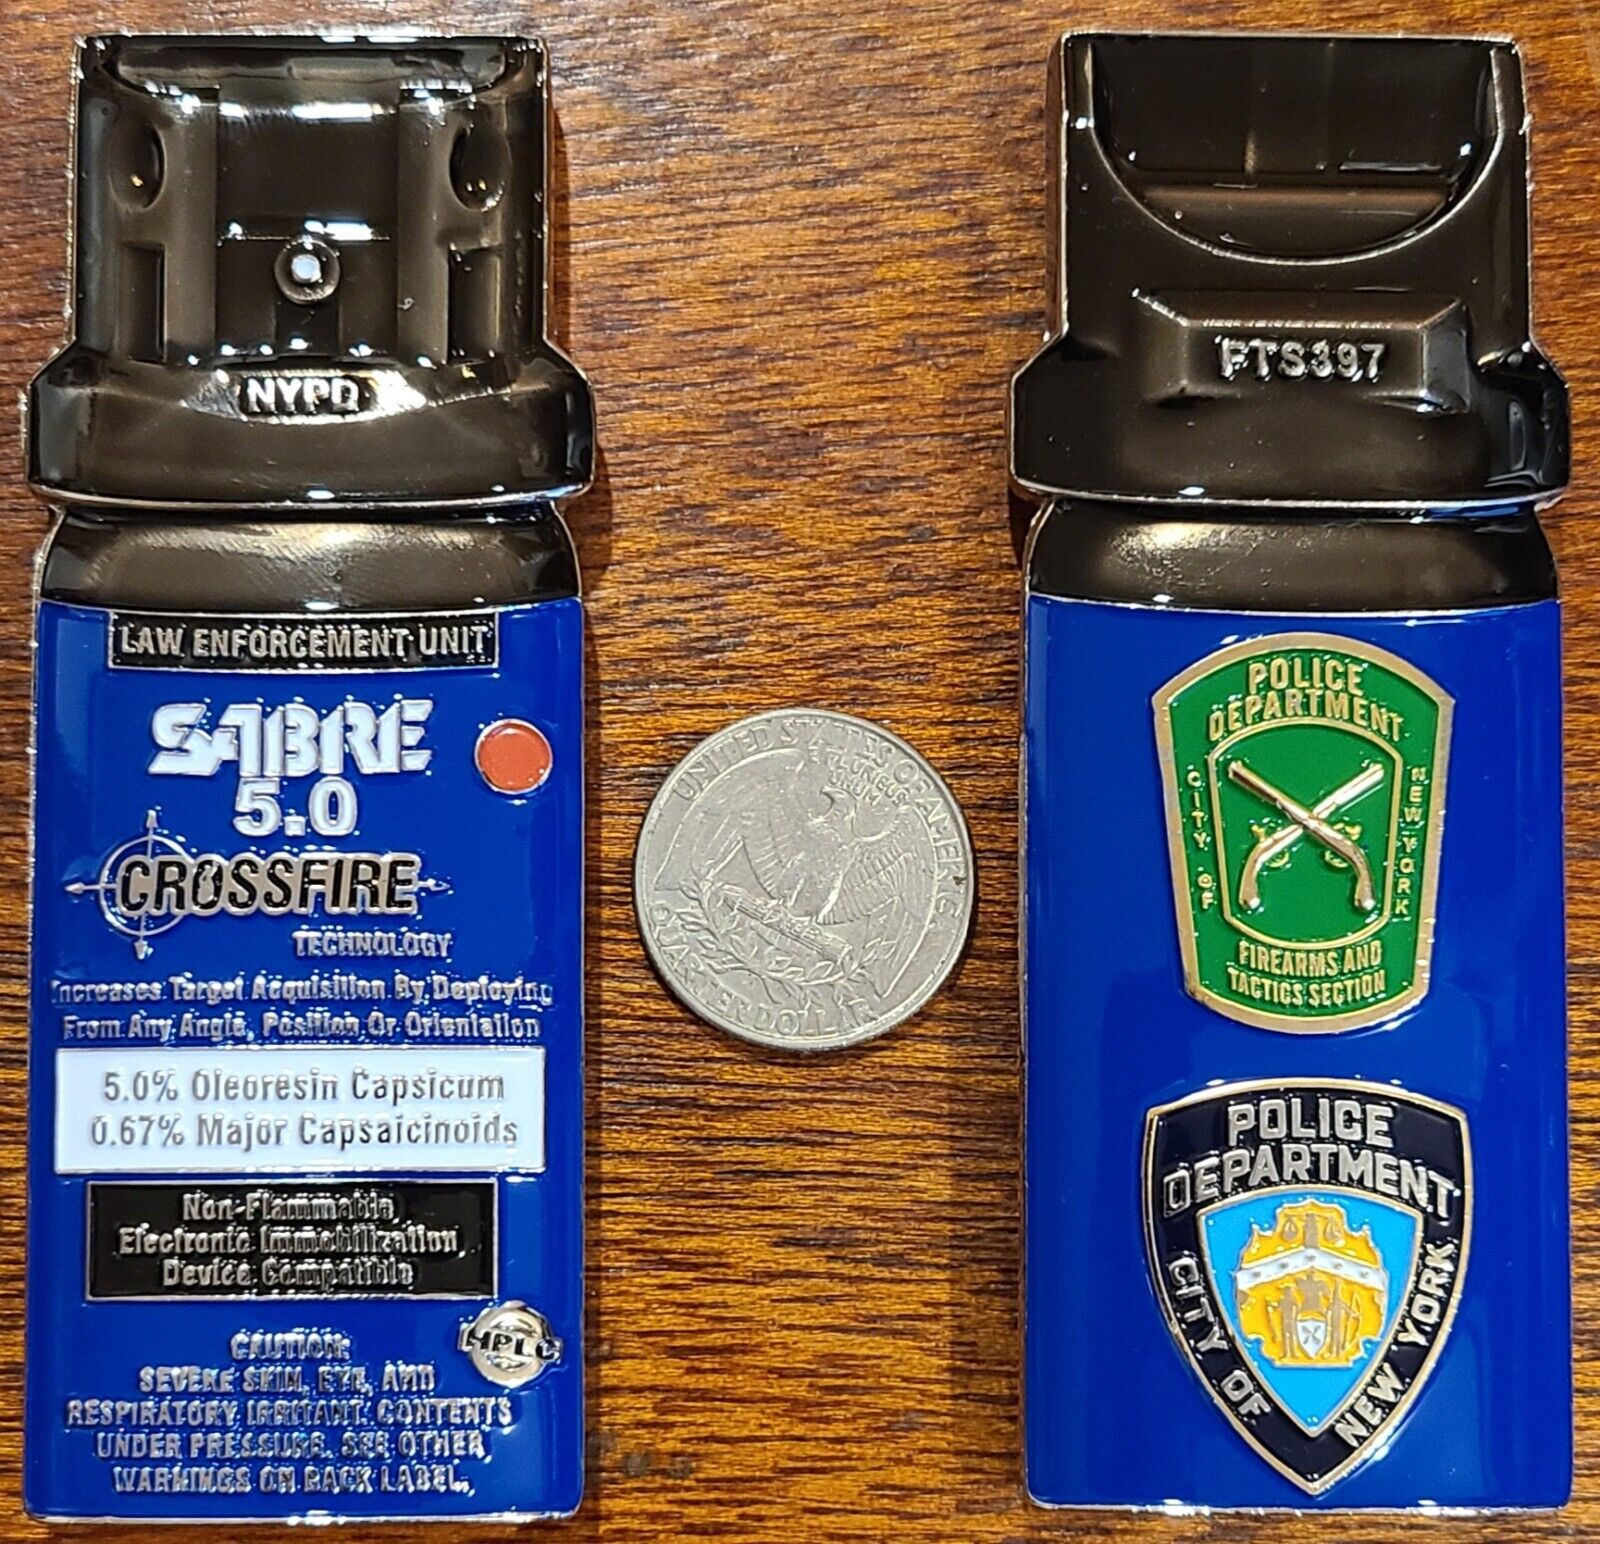 NYPD Firearms & Tactics Section -Sabre OC Spray Master Instructor Challenge Coin